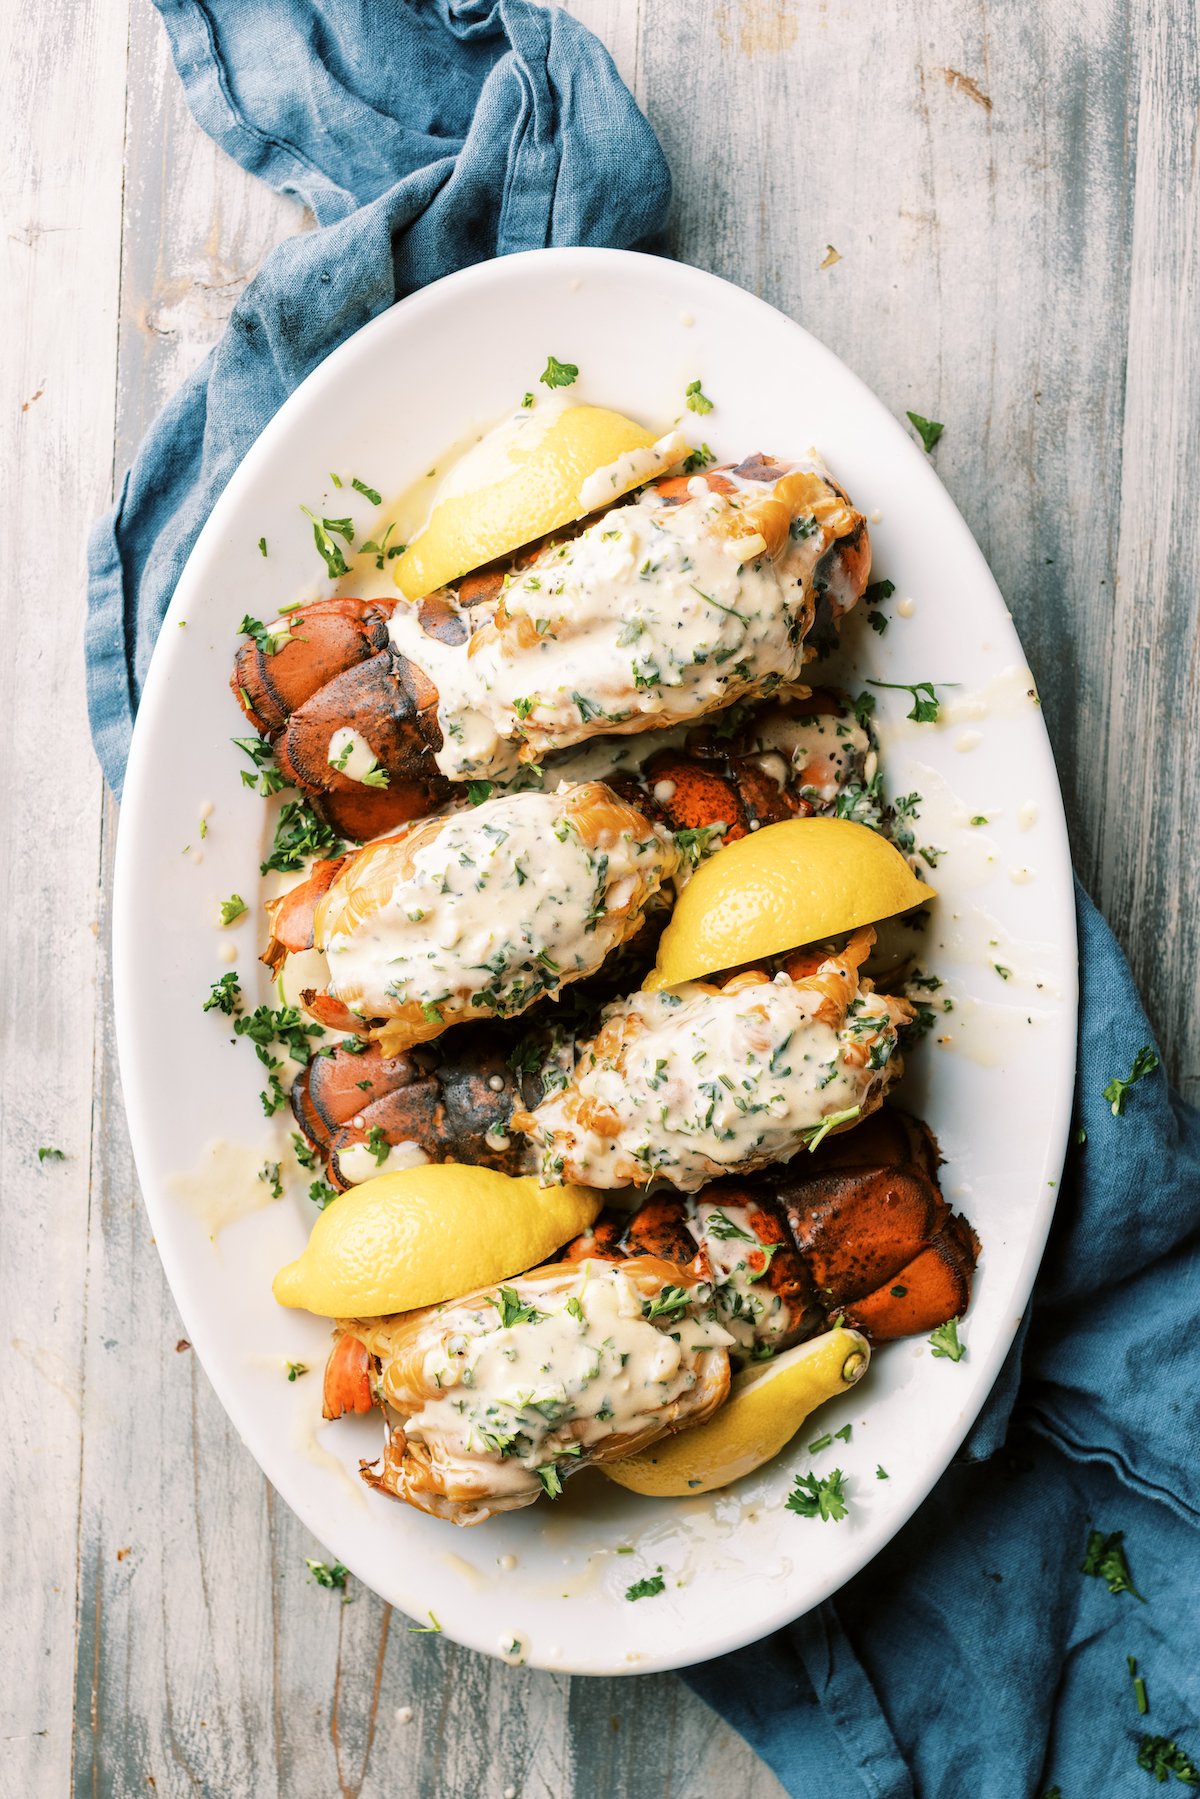 Smoked Maine Lobster With Garlic Butter Cream Sauce